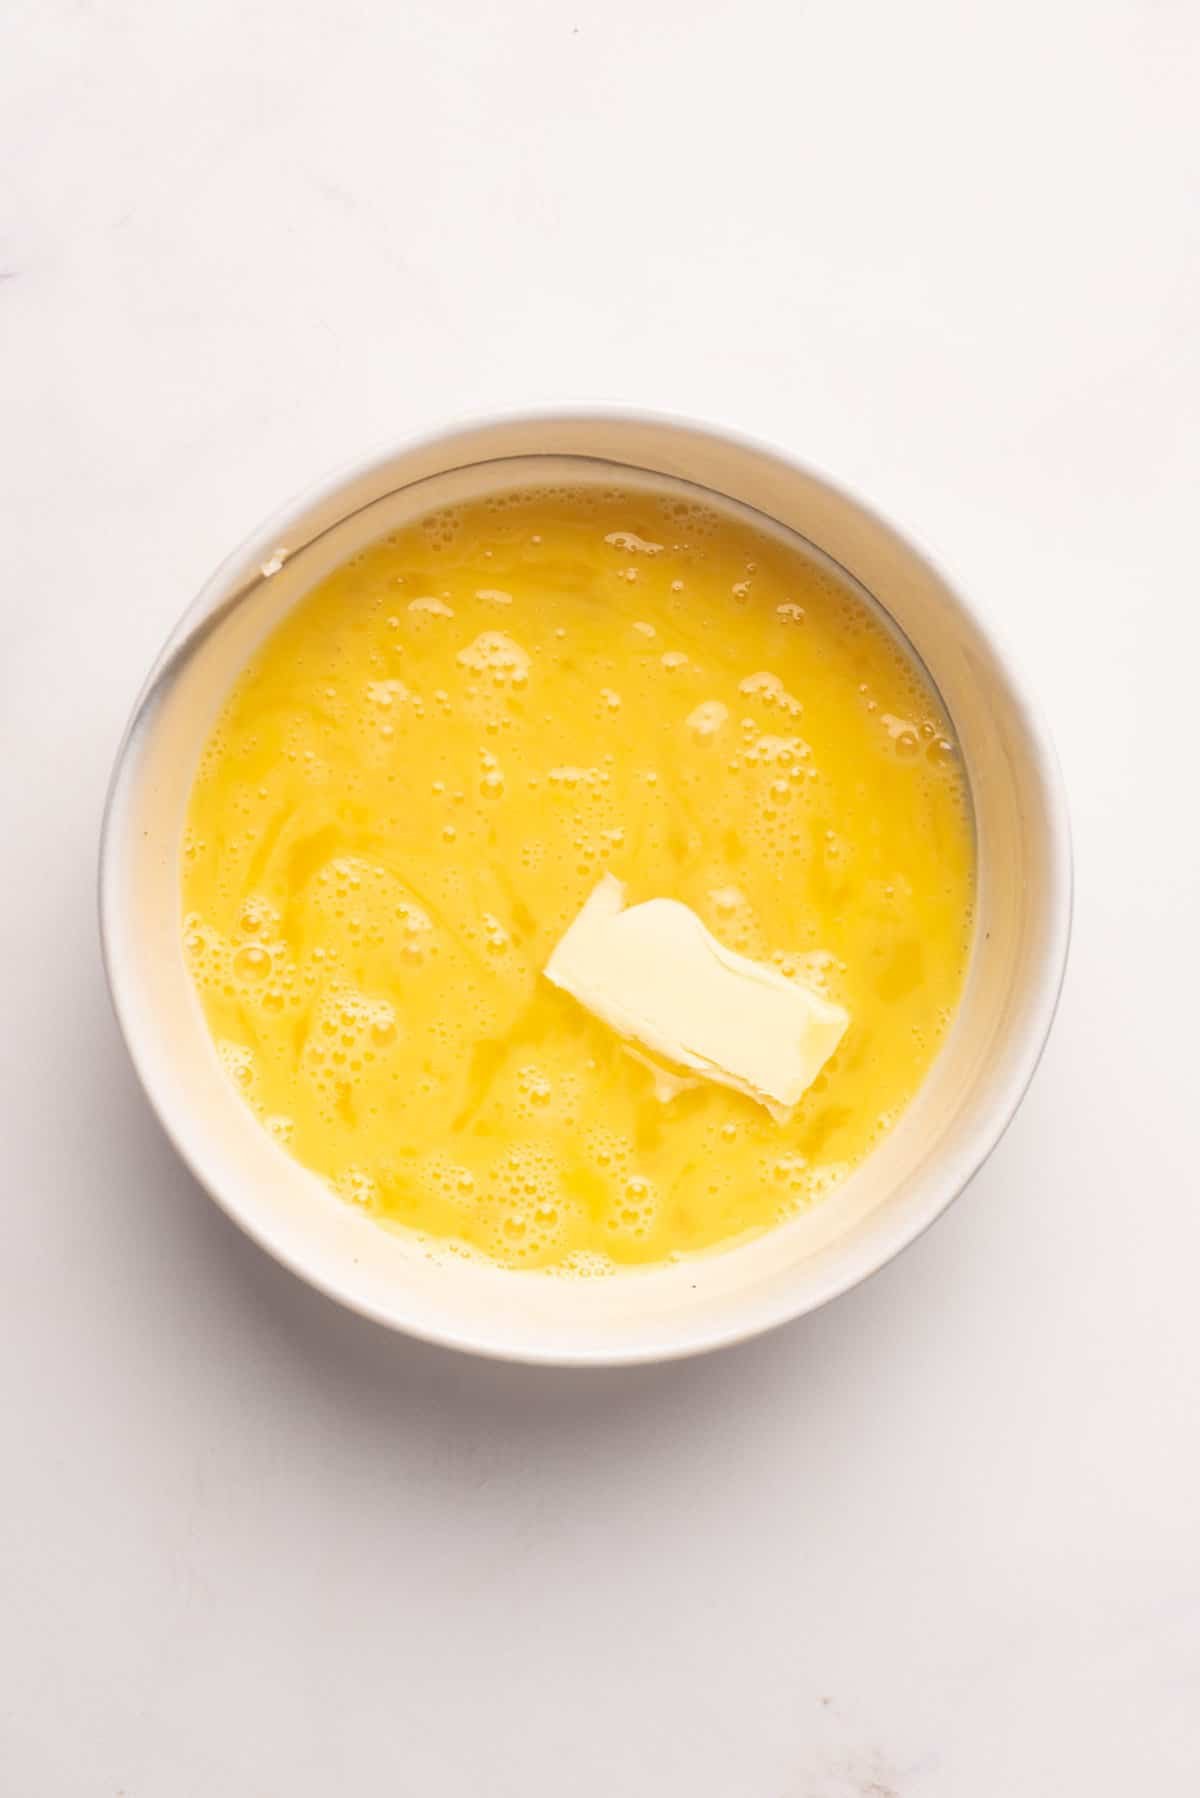 An image of butter being added to the scrambled eggs mixture.